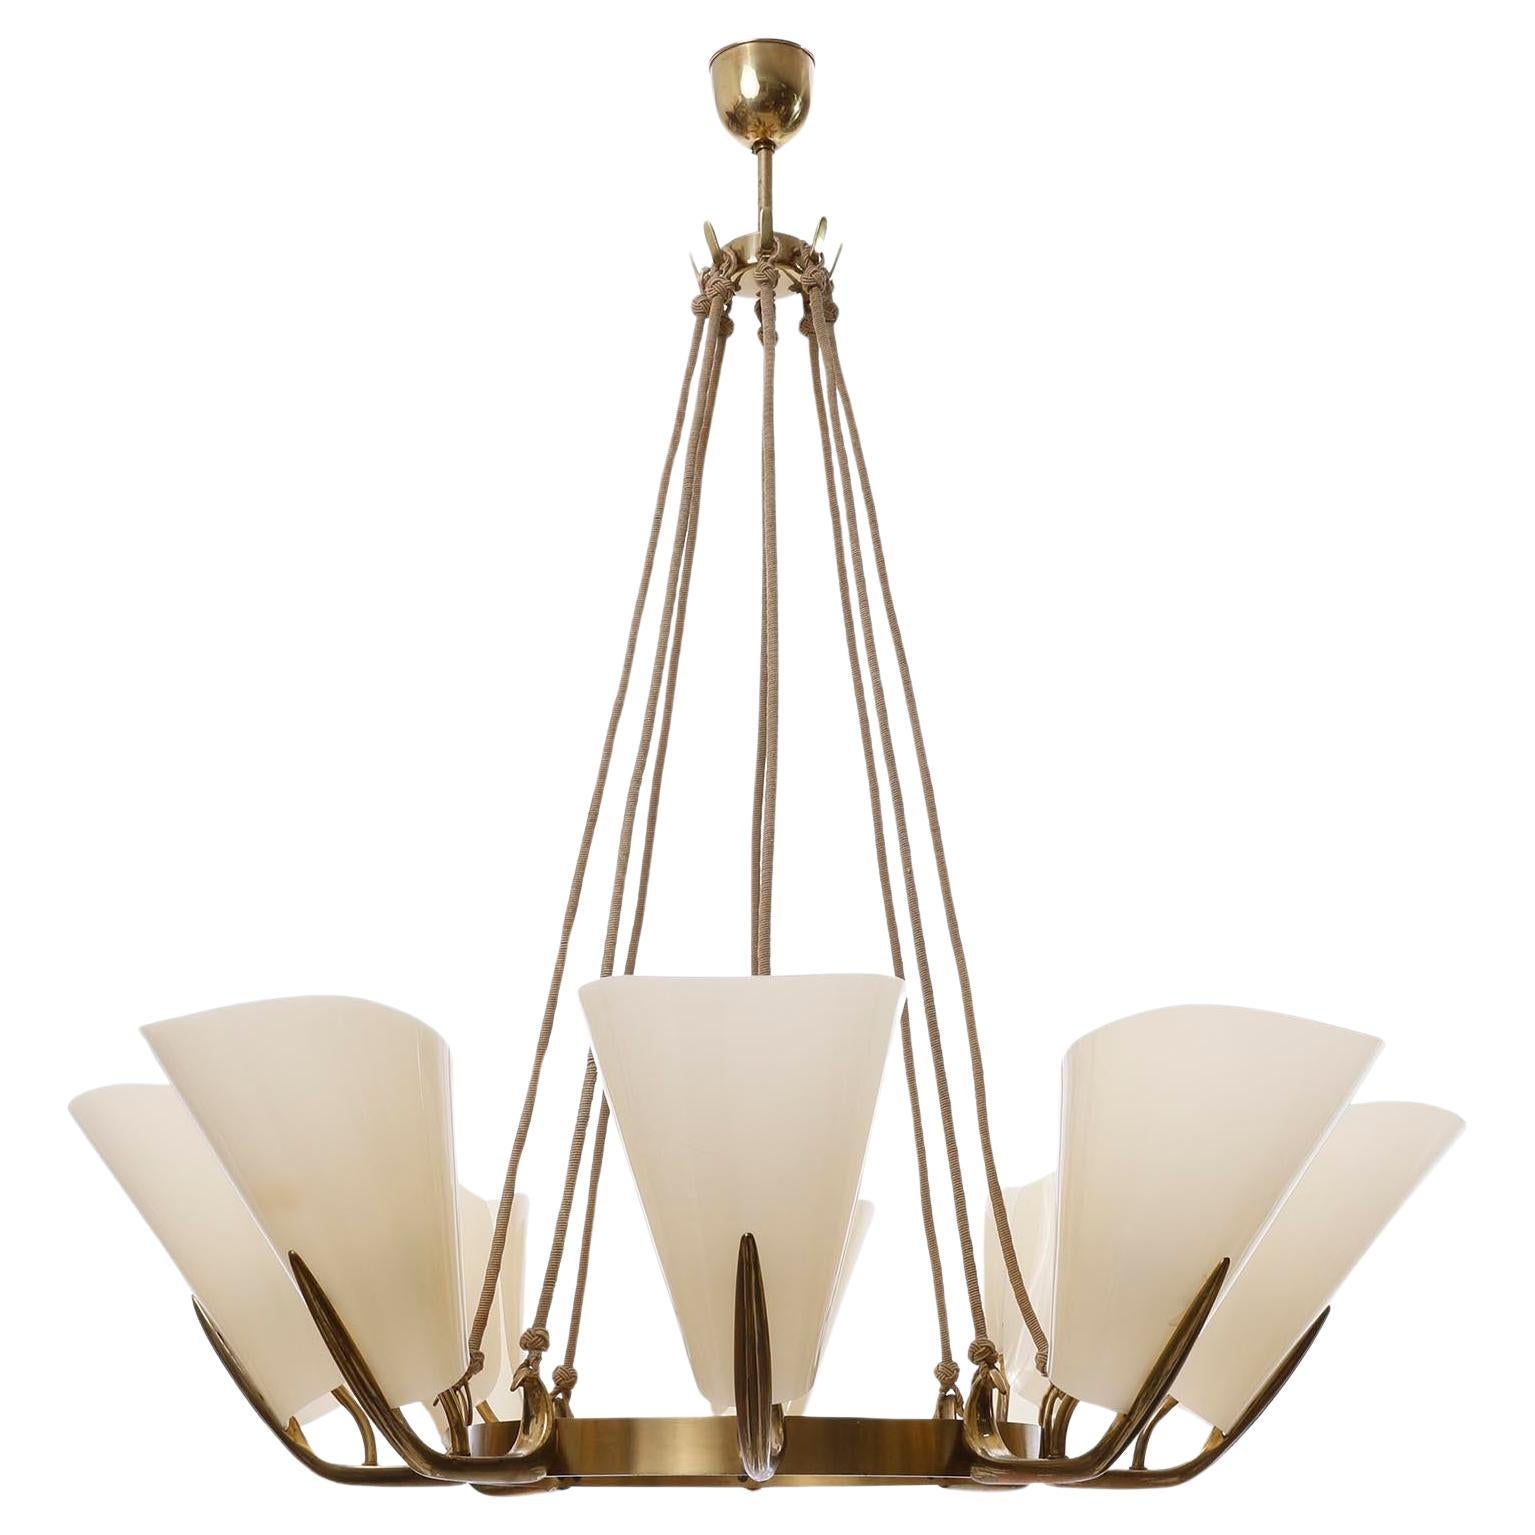 A fantastic and extra large 8-arm pendant chandelier manufactured in midcentury, crica 1960 (late 1950s or early 1960s).
The light fixture is made of a solid, polished brass frame with curved arms suspended on cords from the ceiling canopy.
A high